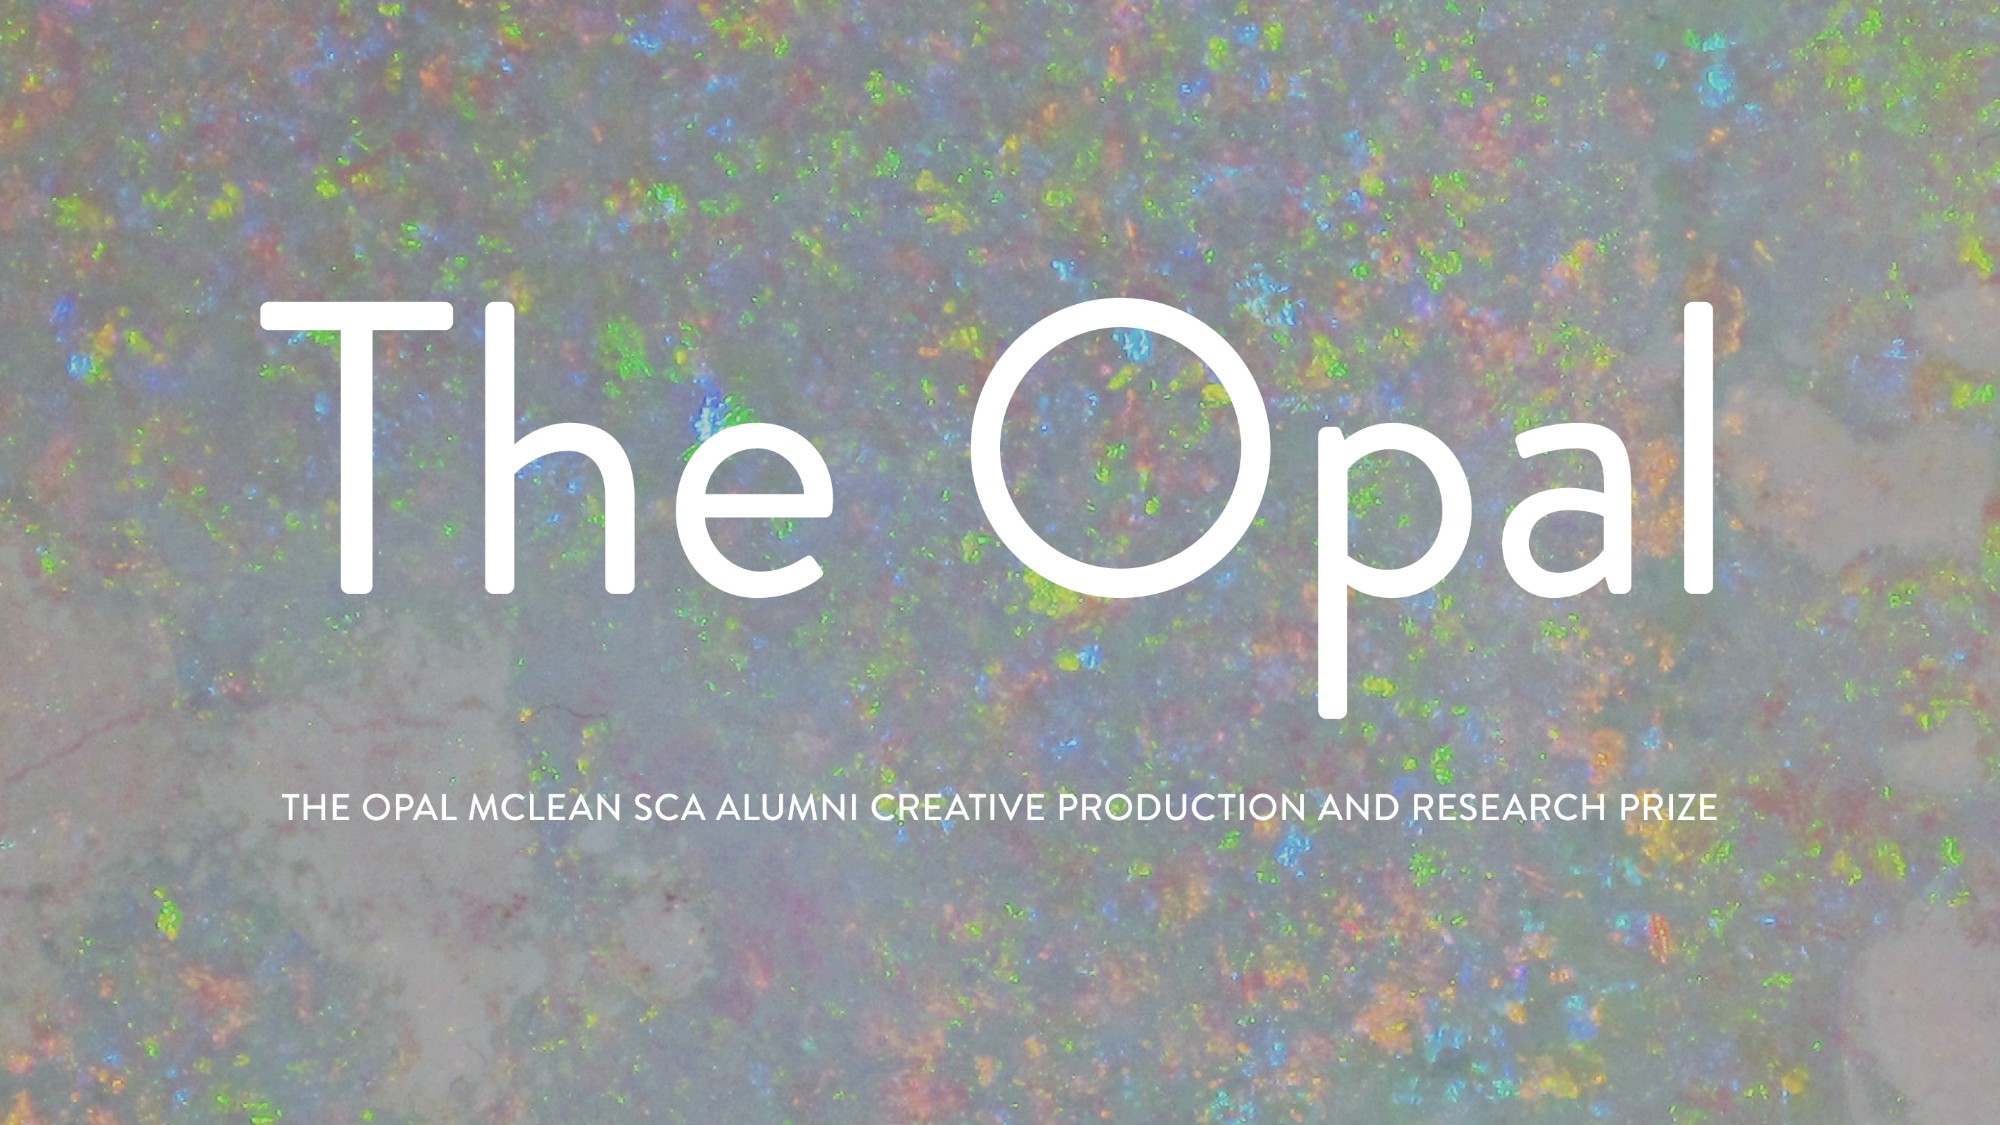 The Opal McLean SCA Alumni Creative Production and Research Prize